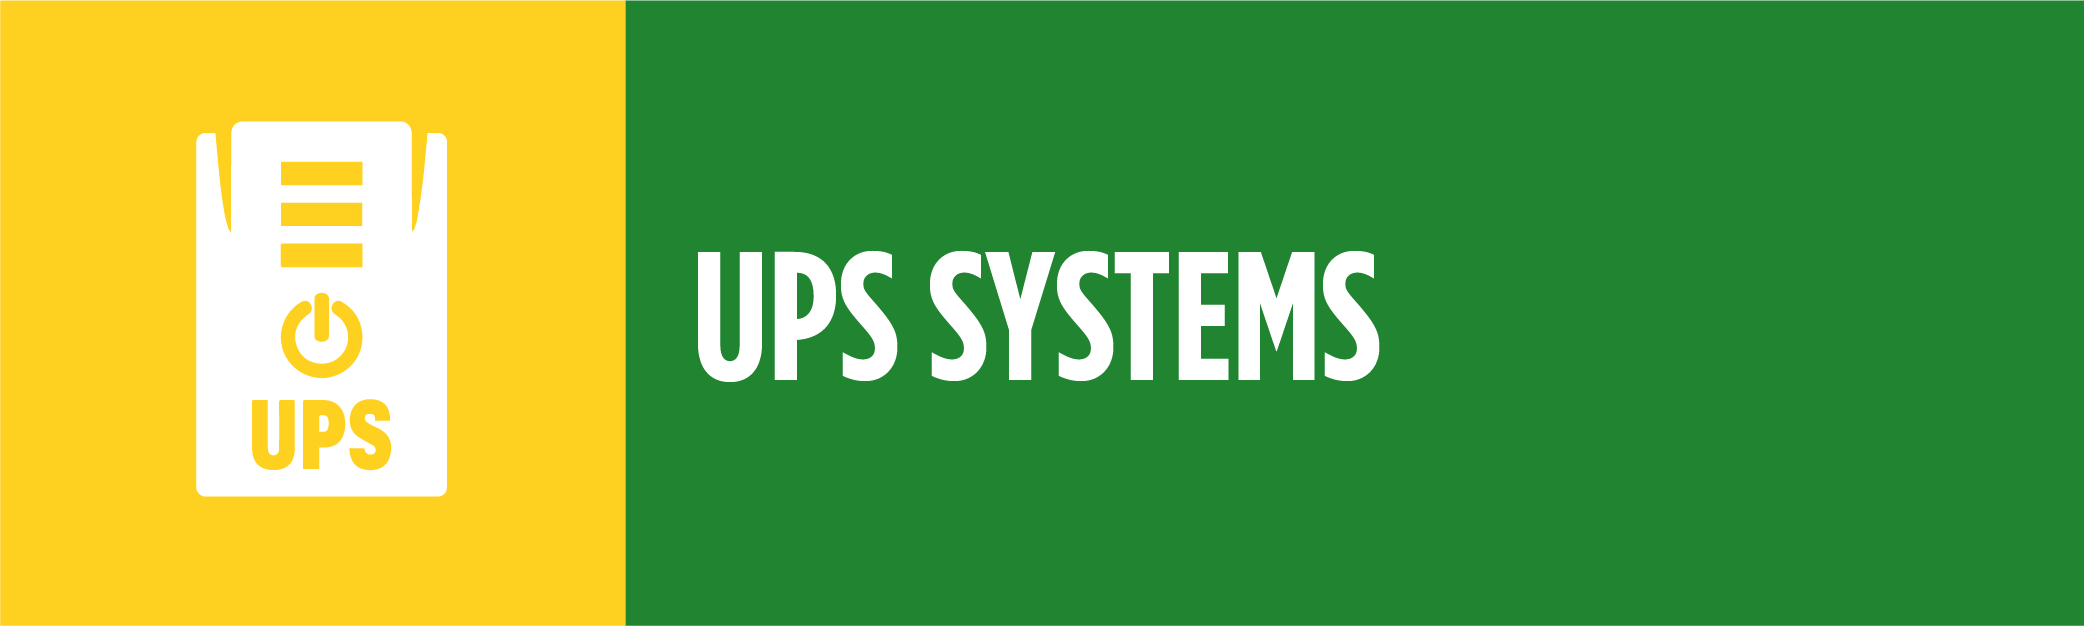 UPS SYSTEMS